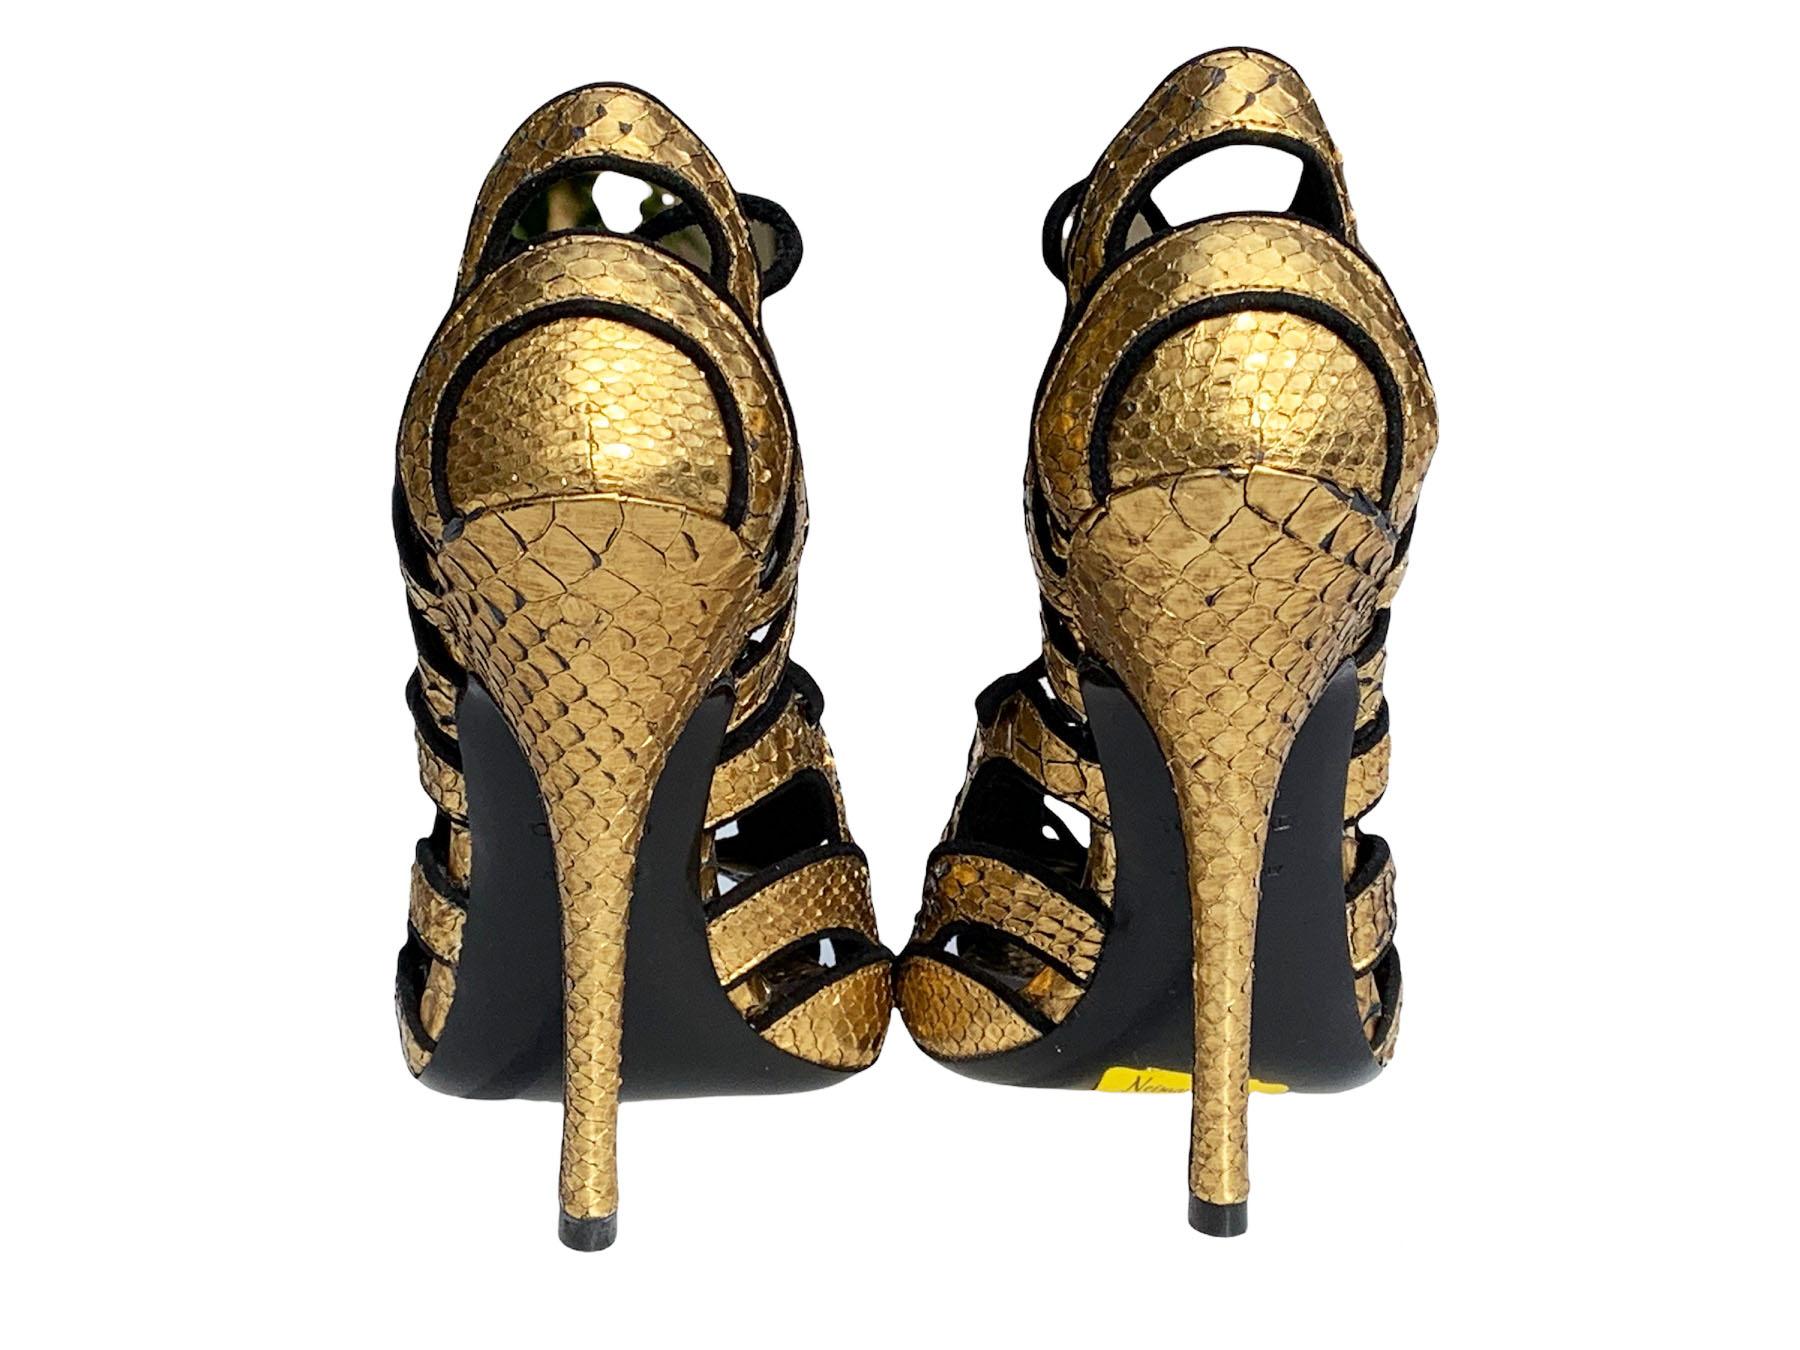 Black New $1790 Tom Ford Gold Metallic Python Lace-Up Cut-Out Shoes Sandals It 37 US 7 For Sale